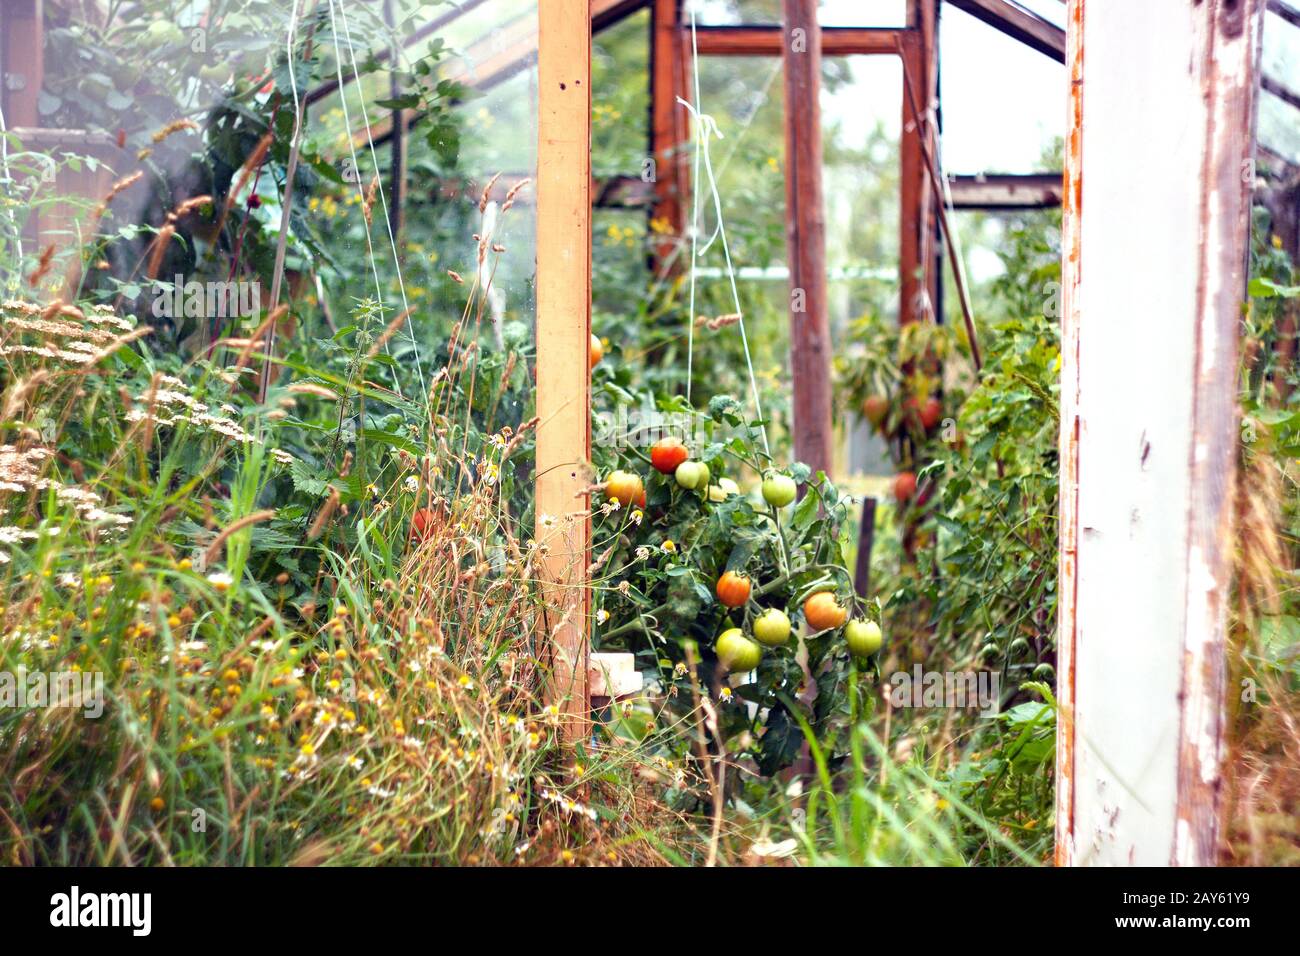 Homemade rustic greenhouse made of glass and old boards  Stock Photo